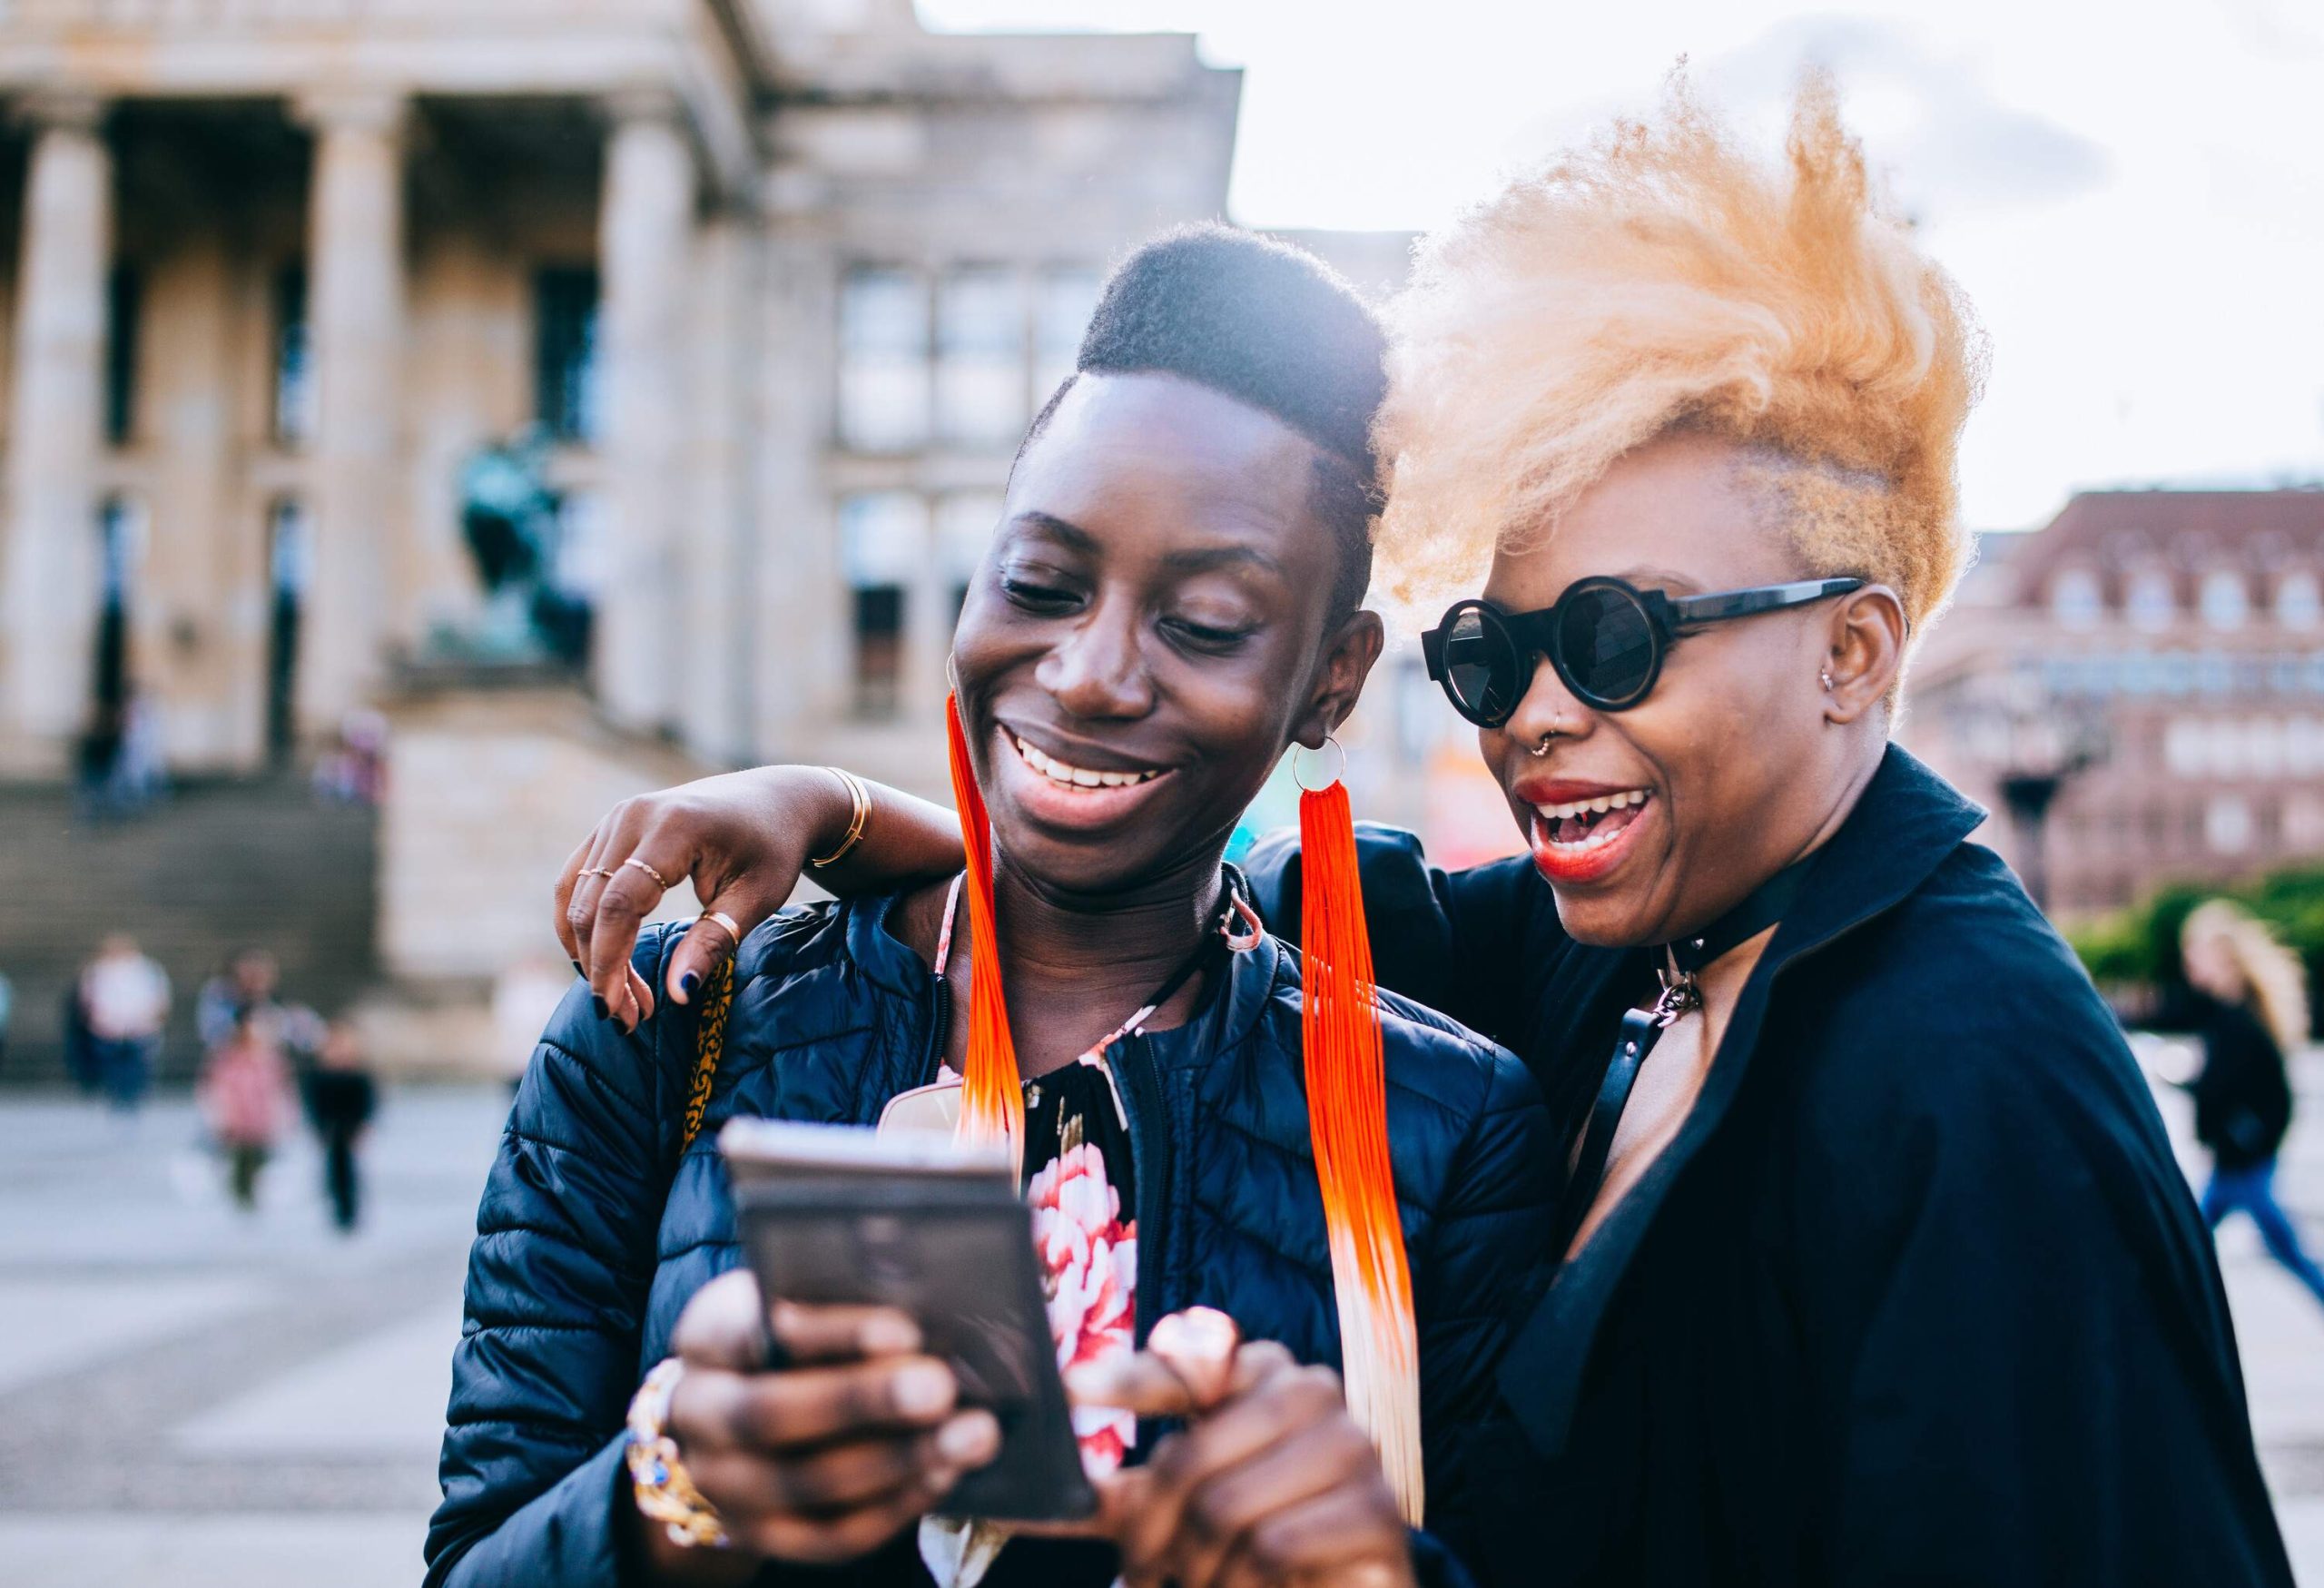 Two friends, one with orange hair and the other with long colourful earrings, smile as they look at a smartphone.